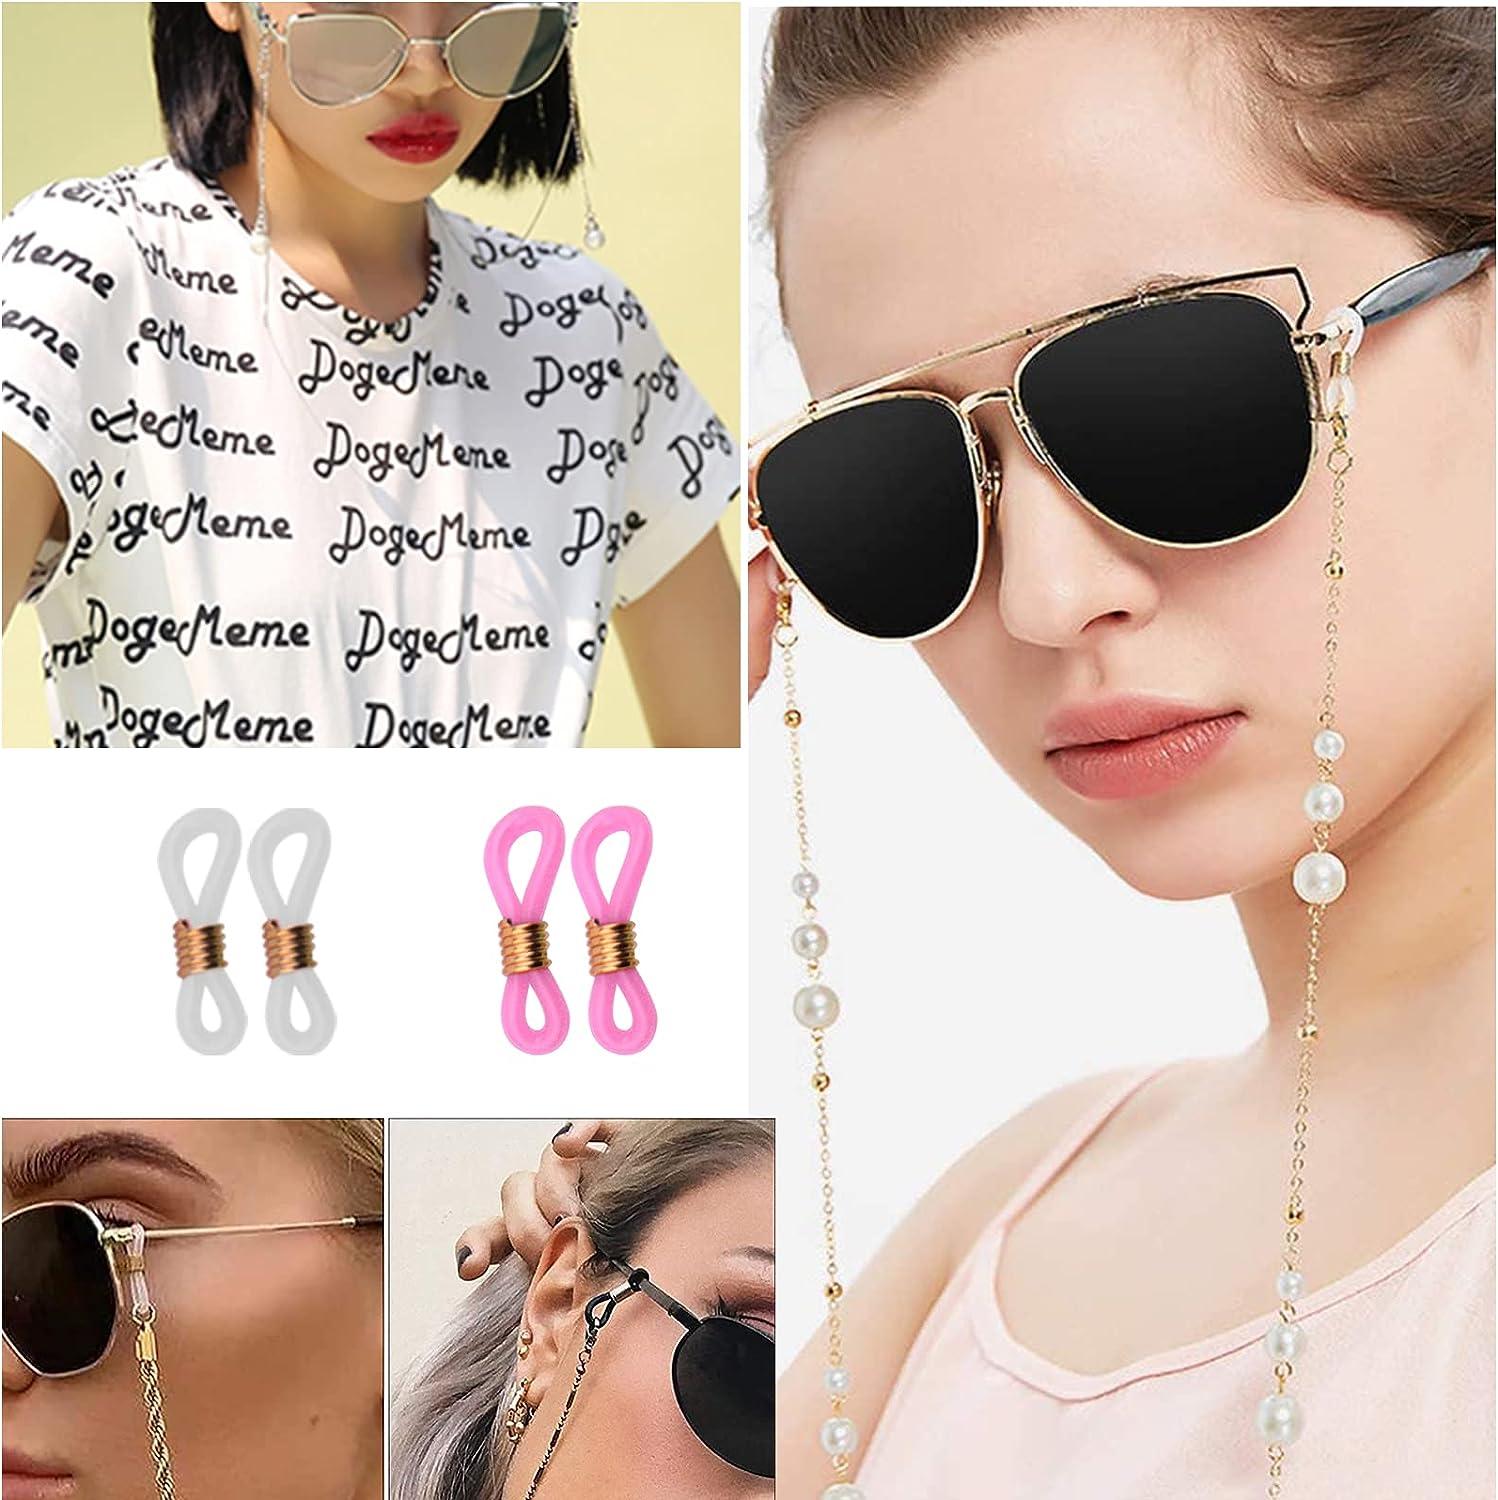 Connectors Eyeglass Chain Ends Retainer Glasses Ring Sun glasses Cord  Holder